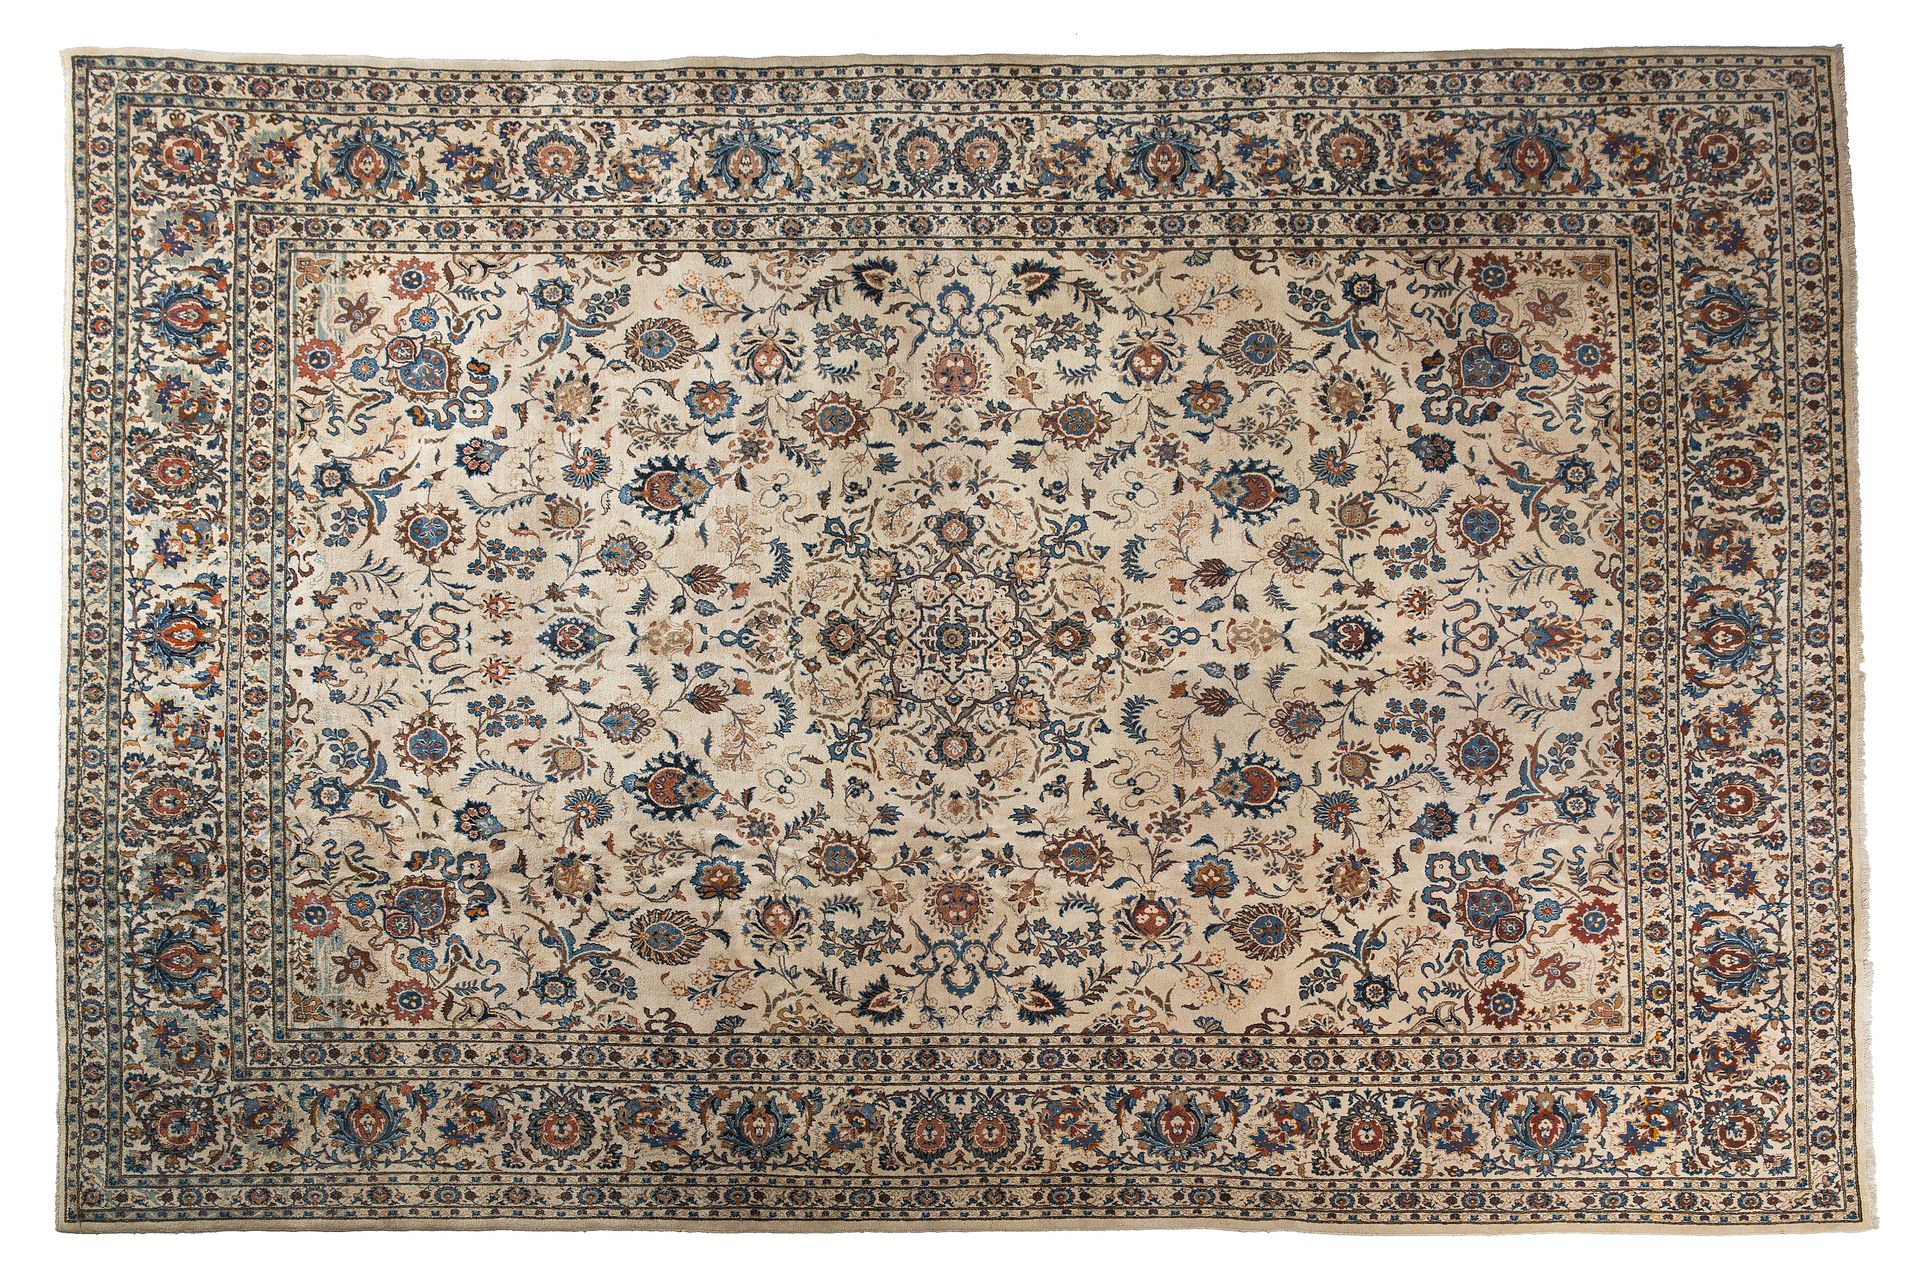 Null Important KACHAN carpet (Iran), mid 20th century

An ivory field, decorated&hellip;